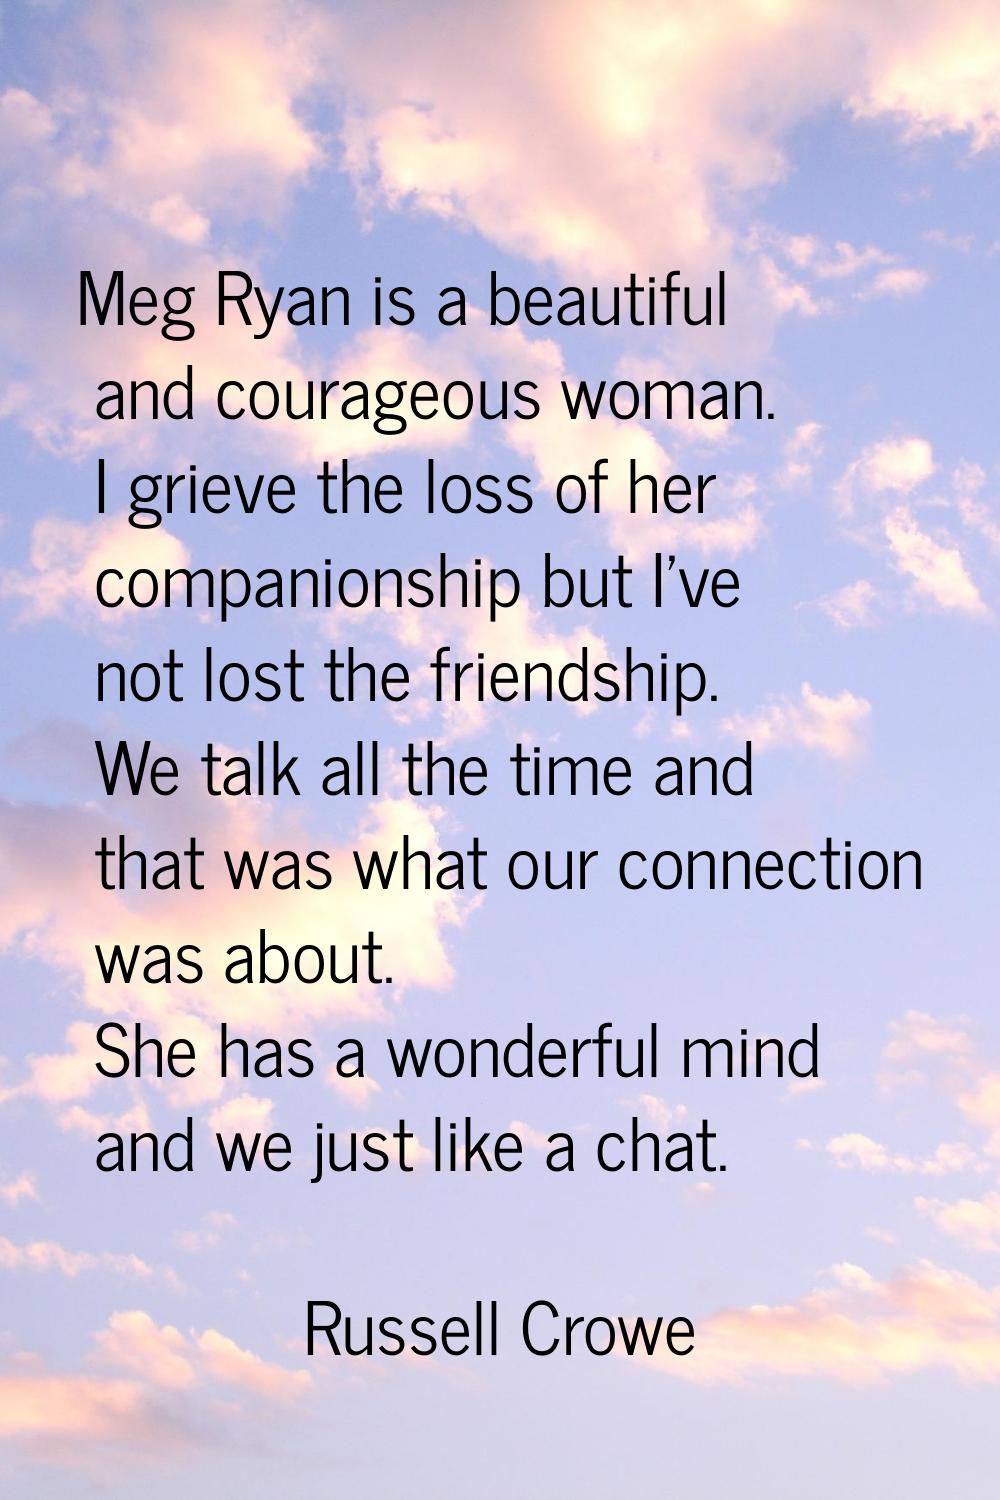 Meg Ryan is a beautiful and courageous woman. I grieve the loss of her companionship but I've not l